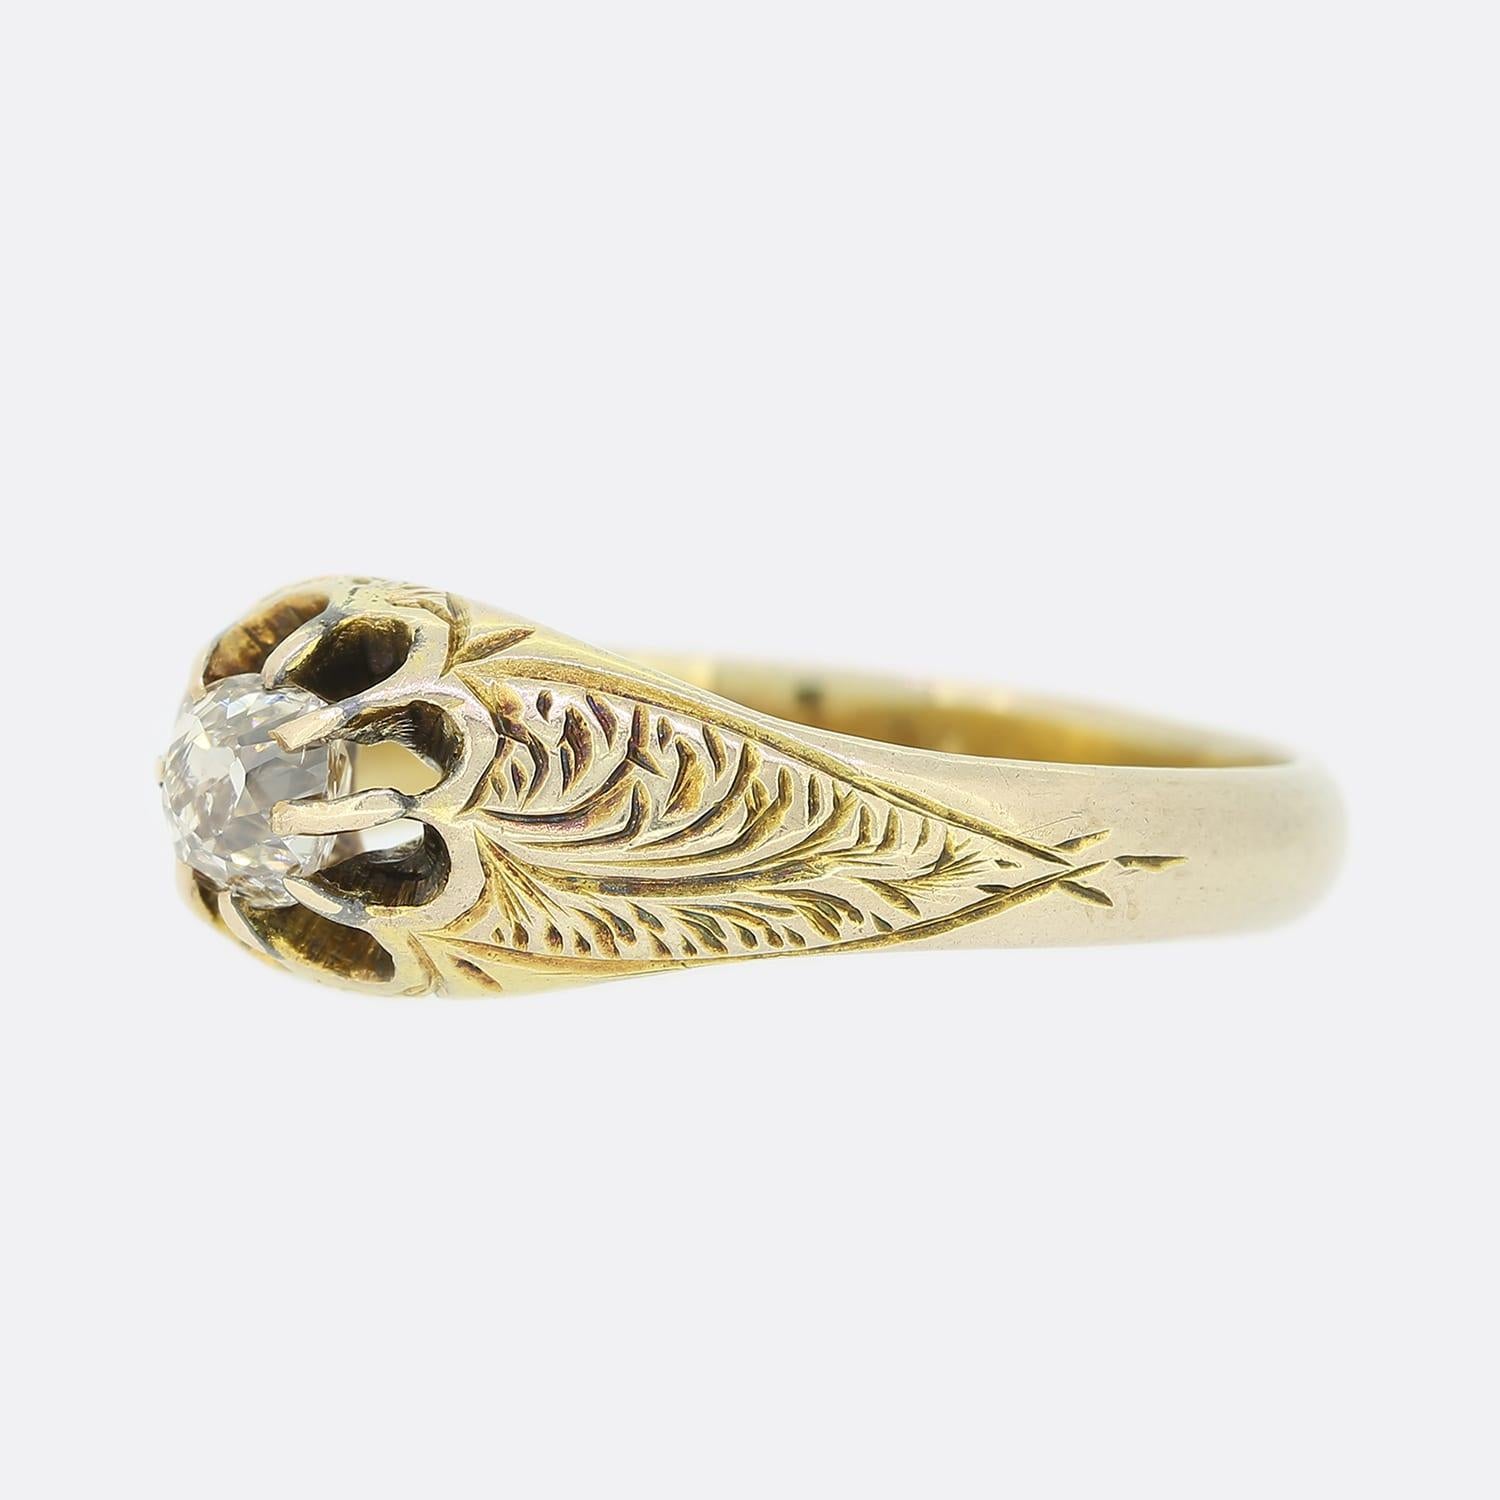 This is a victorian 15ct yellow gold diamond gypsy ring. The shoulders of the ring feature a lovely hand-crafted pattern which leads up to the claw set old mine cut diamond. We love the slight tarnish on the ring as we believe it adds to the patina,